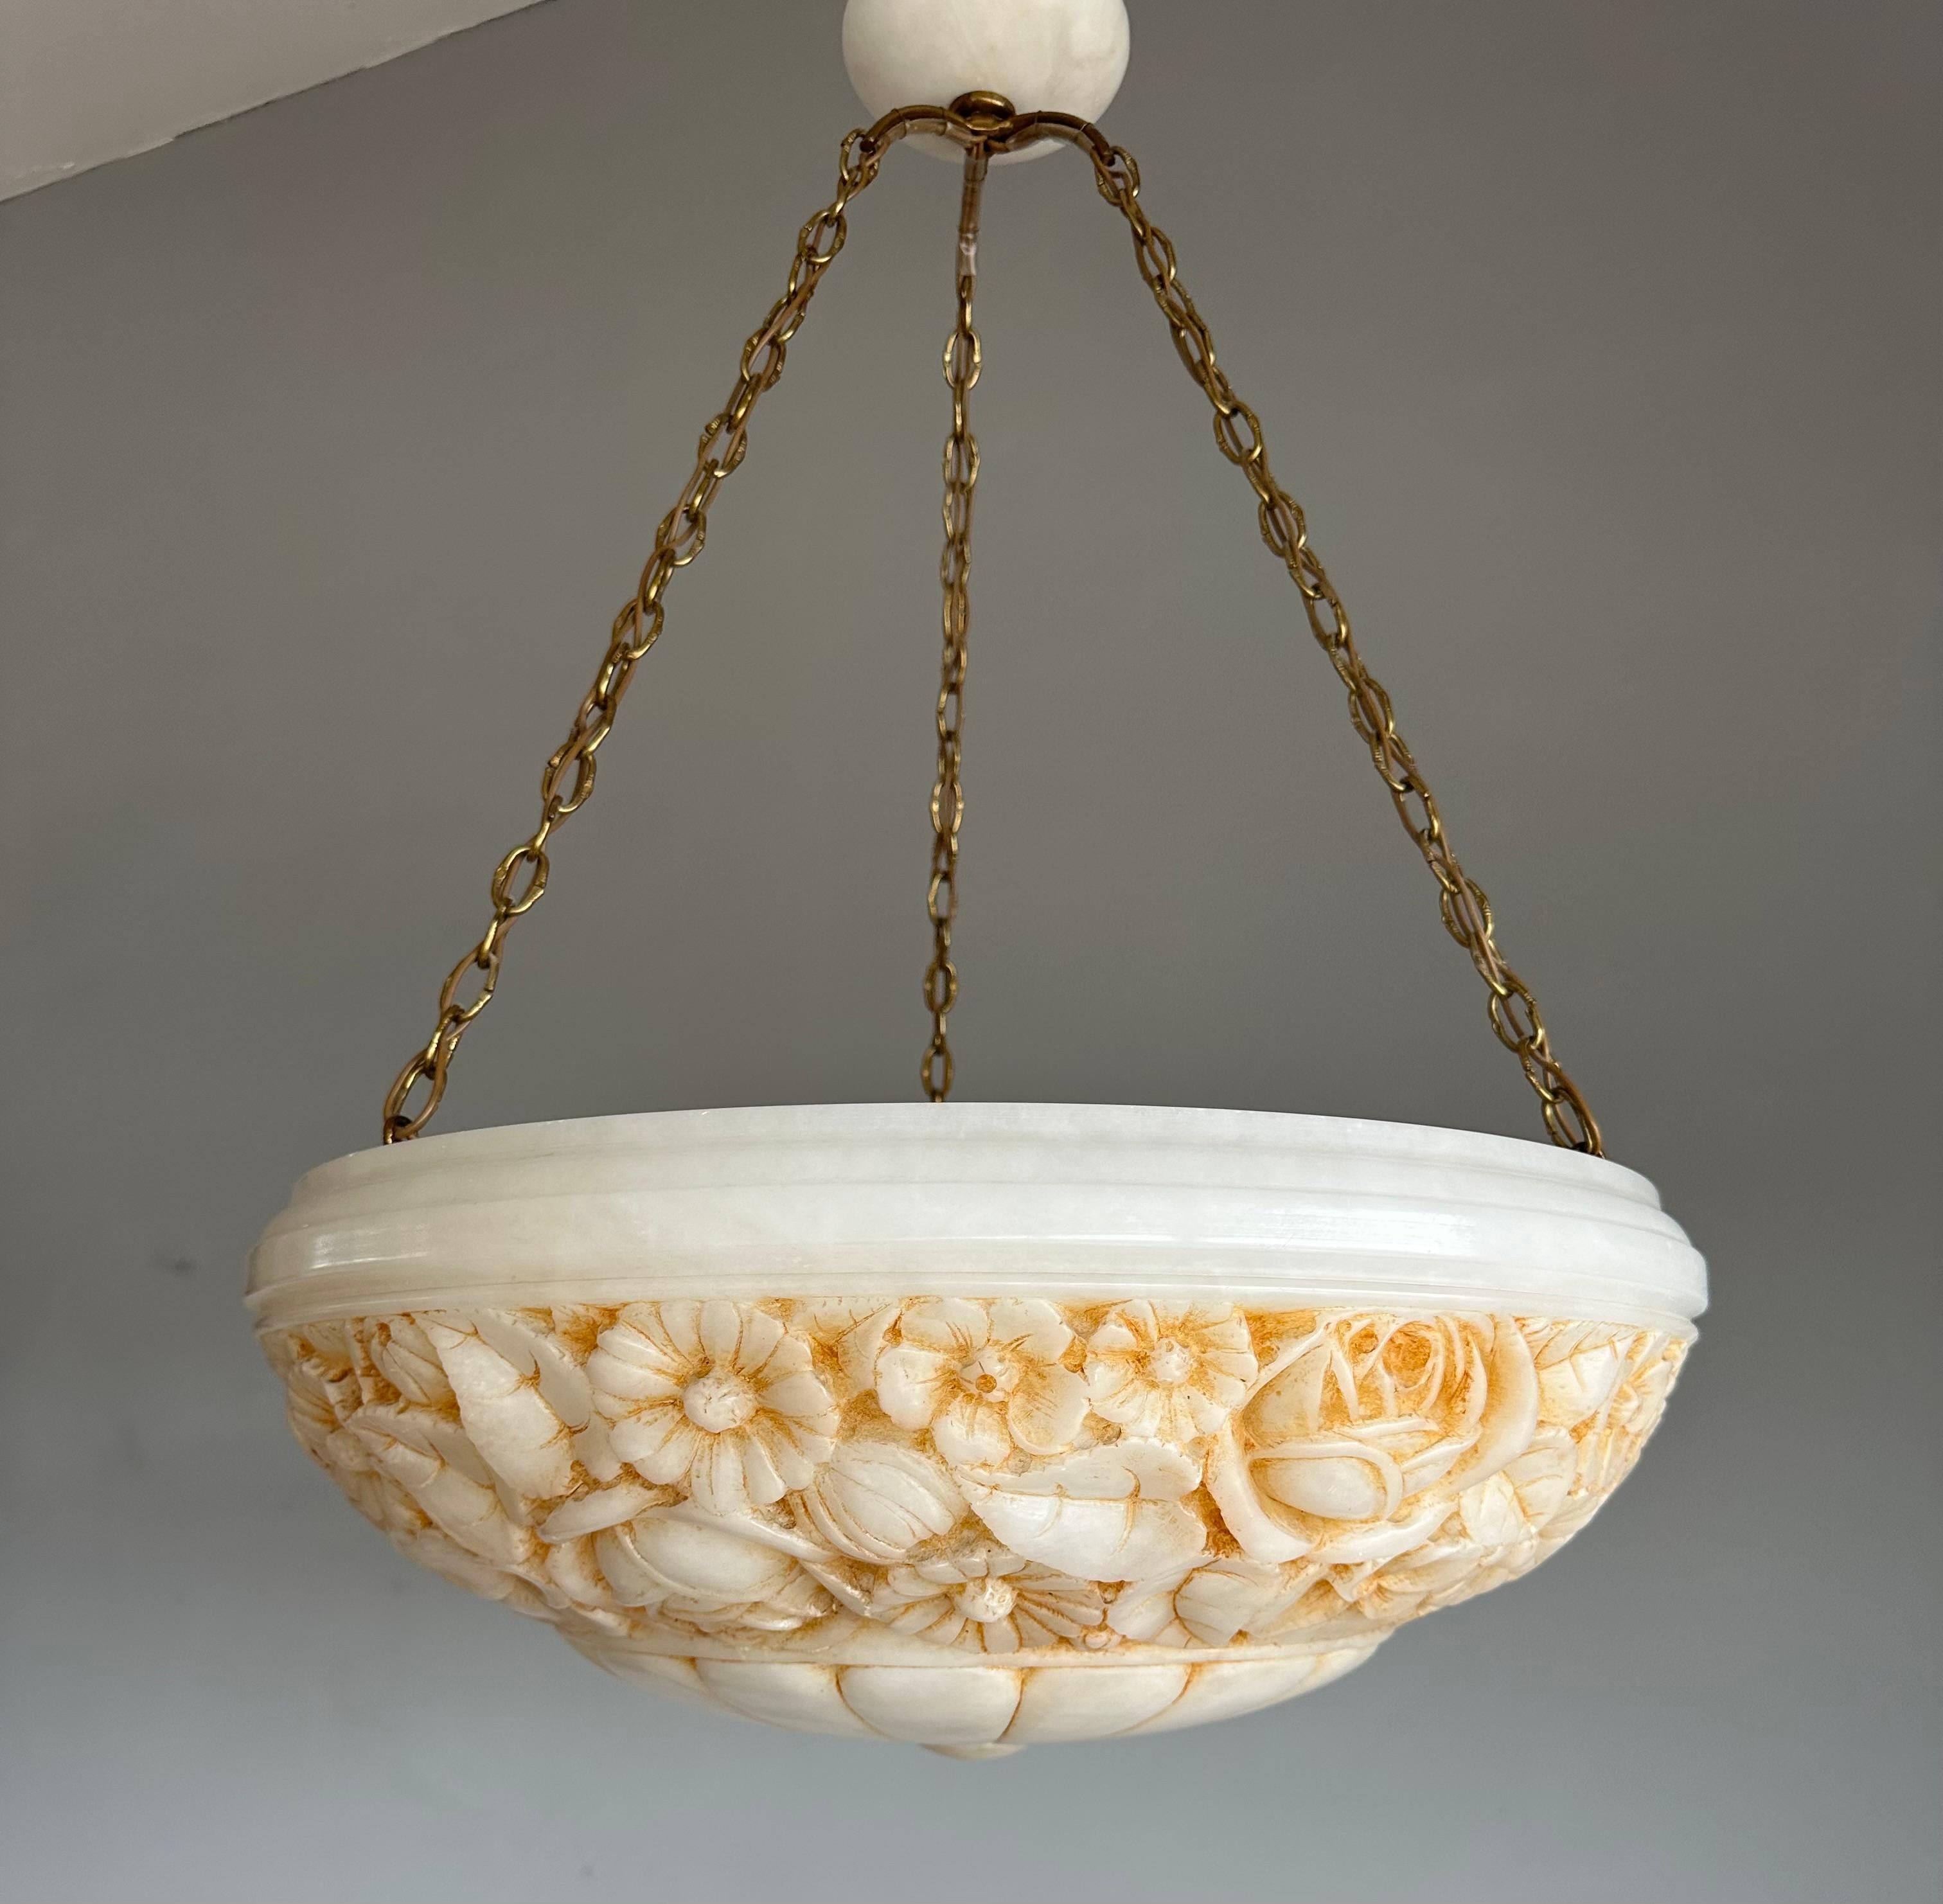 Awesome Arts & Crafts, 3-light alabaster chandelier with awesome carvings.

Thanks to its large size, its superbly handcarved rose and flower patterns AND its superb condition this museum worthy alabaster chandelier will light up both your days and